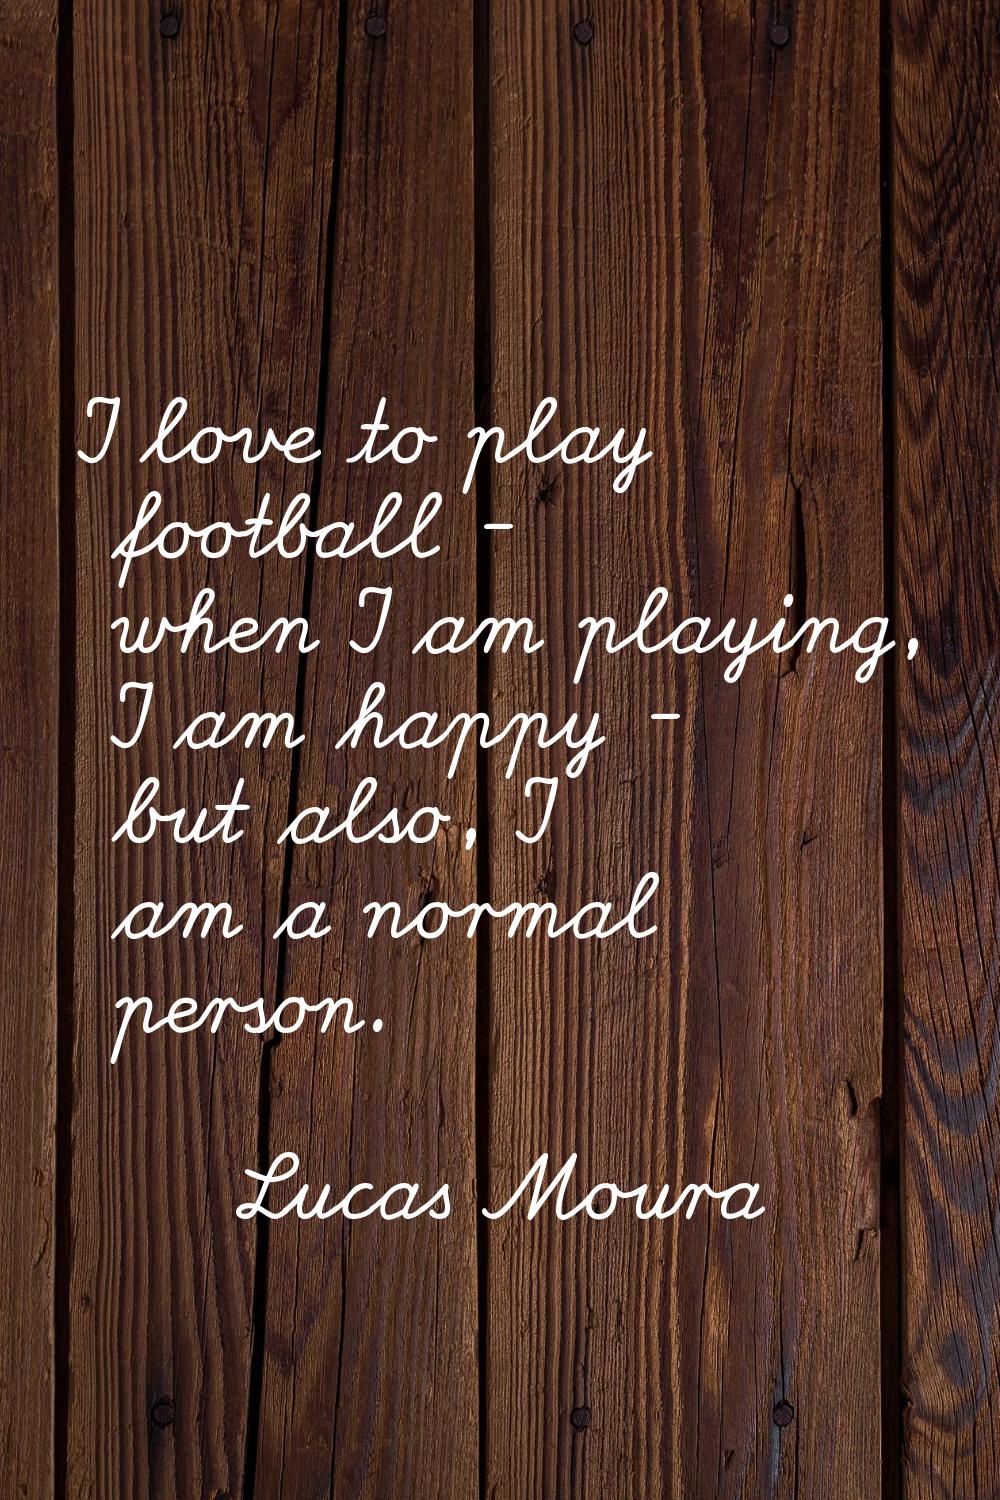 I love to play football - when I am playing, I am happy - but also, I am a normal person.